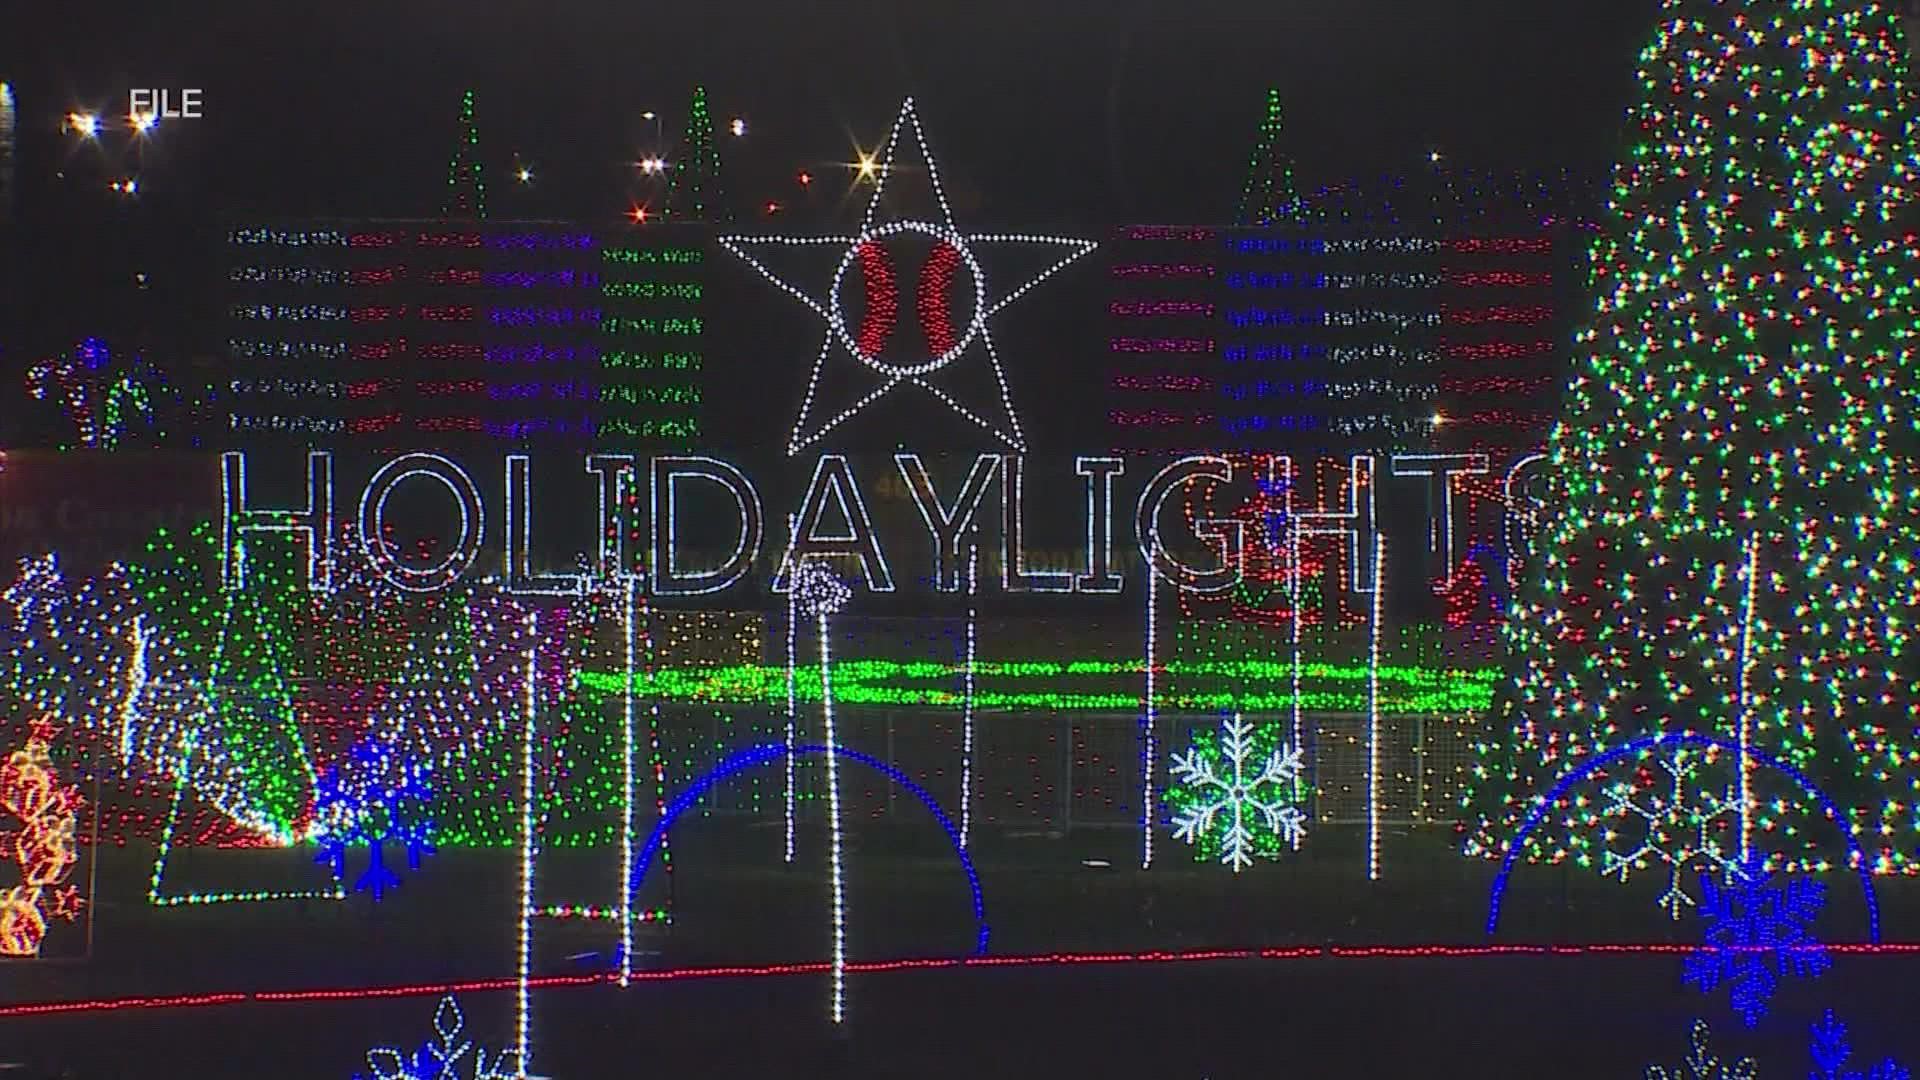 Houston holiday events 2022: Downtown Houston villages and lights